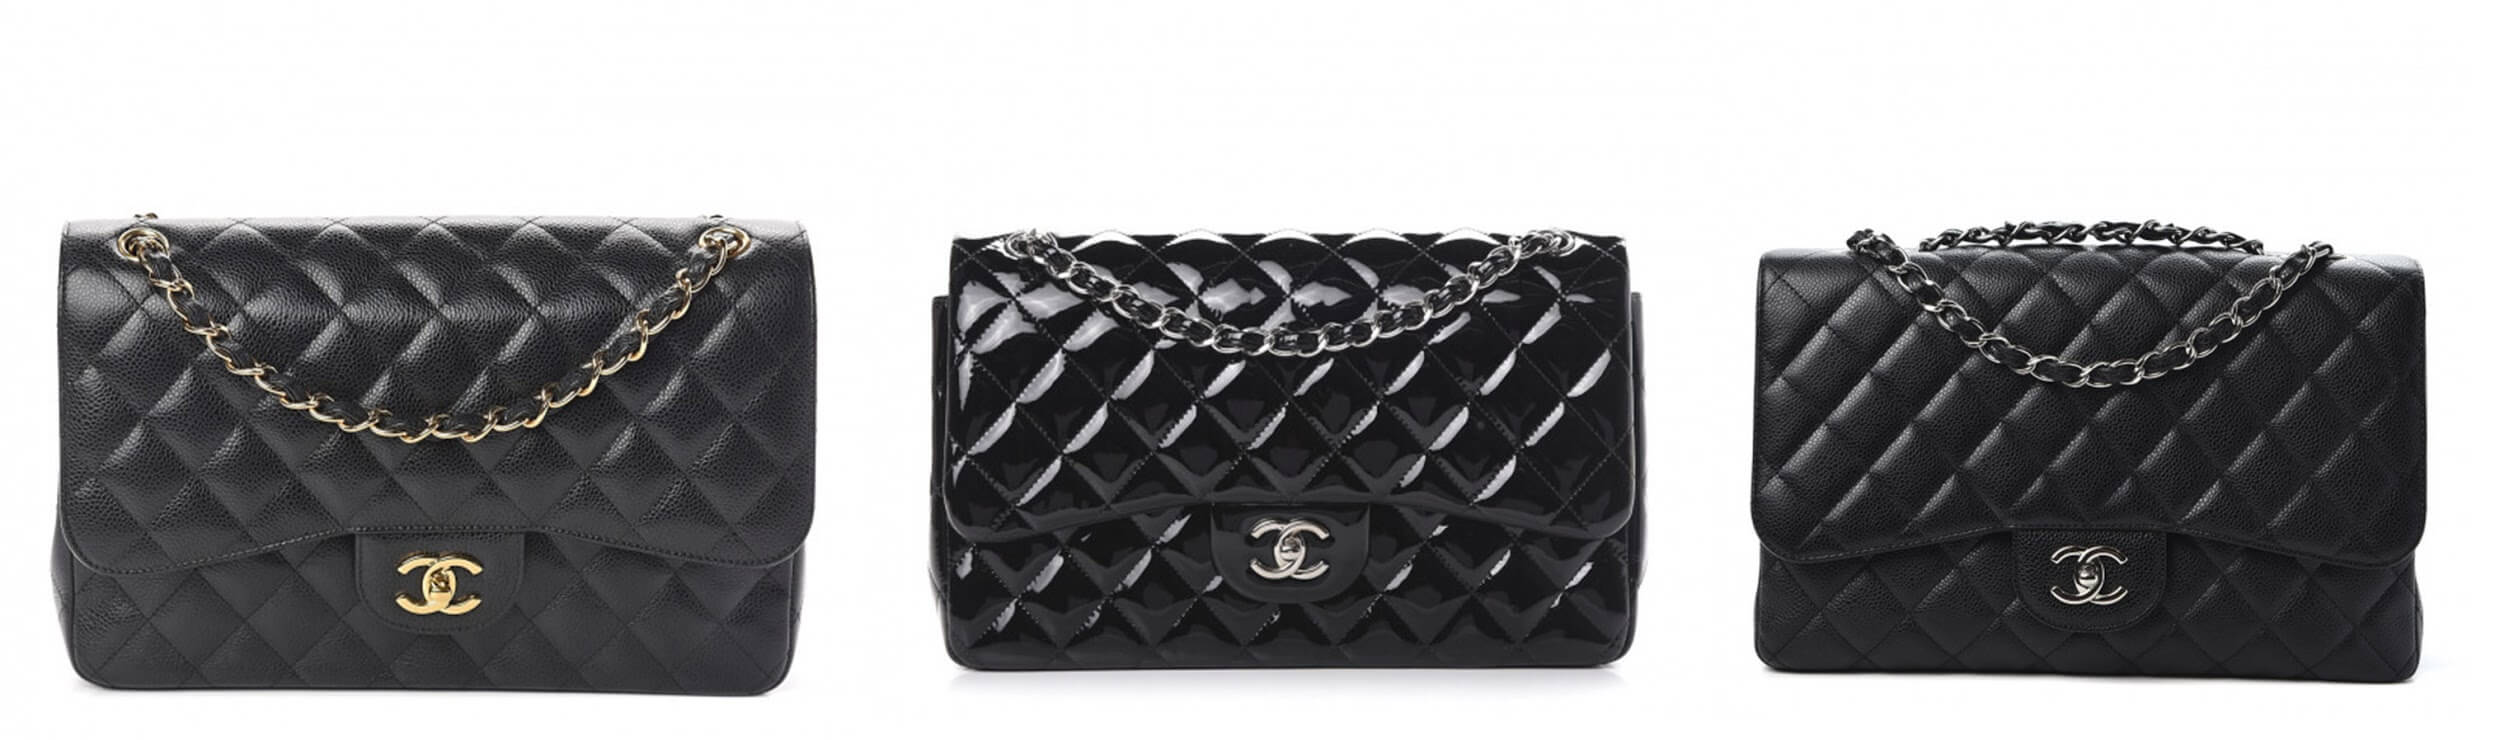 How much is a Chanel bag in Paris? - Quora